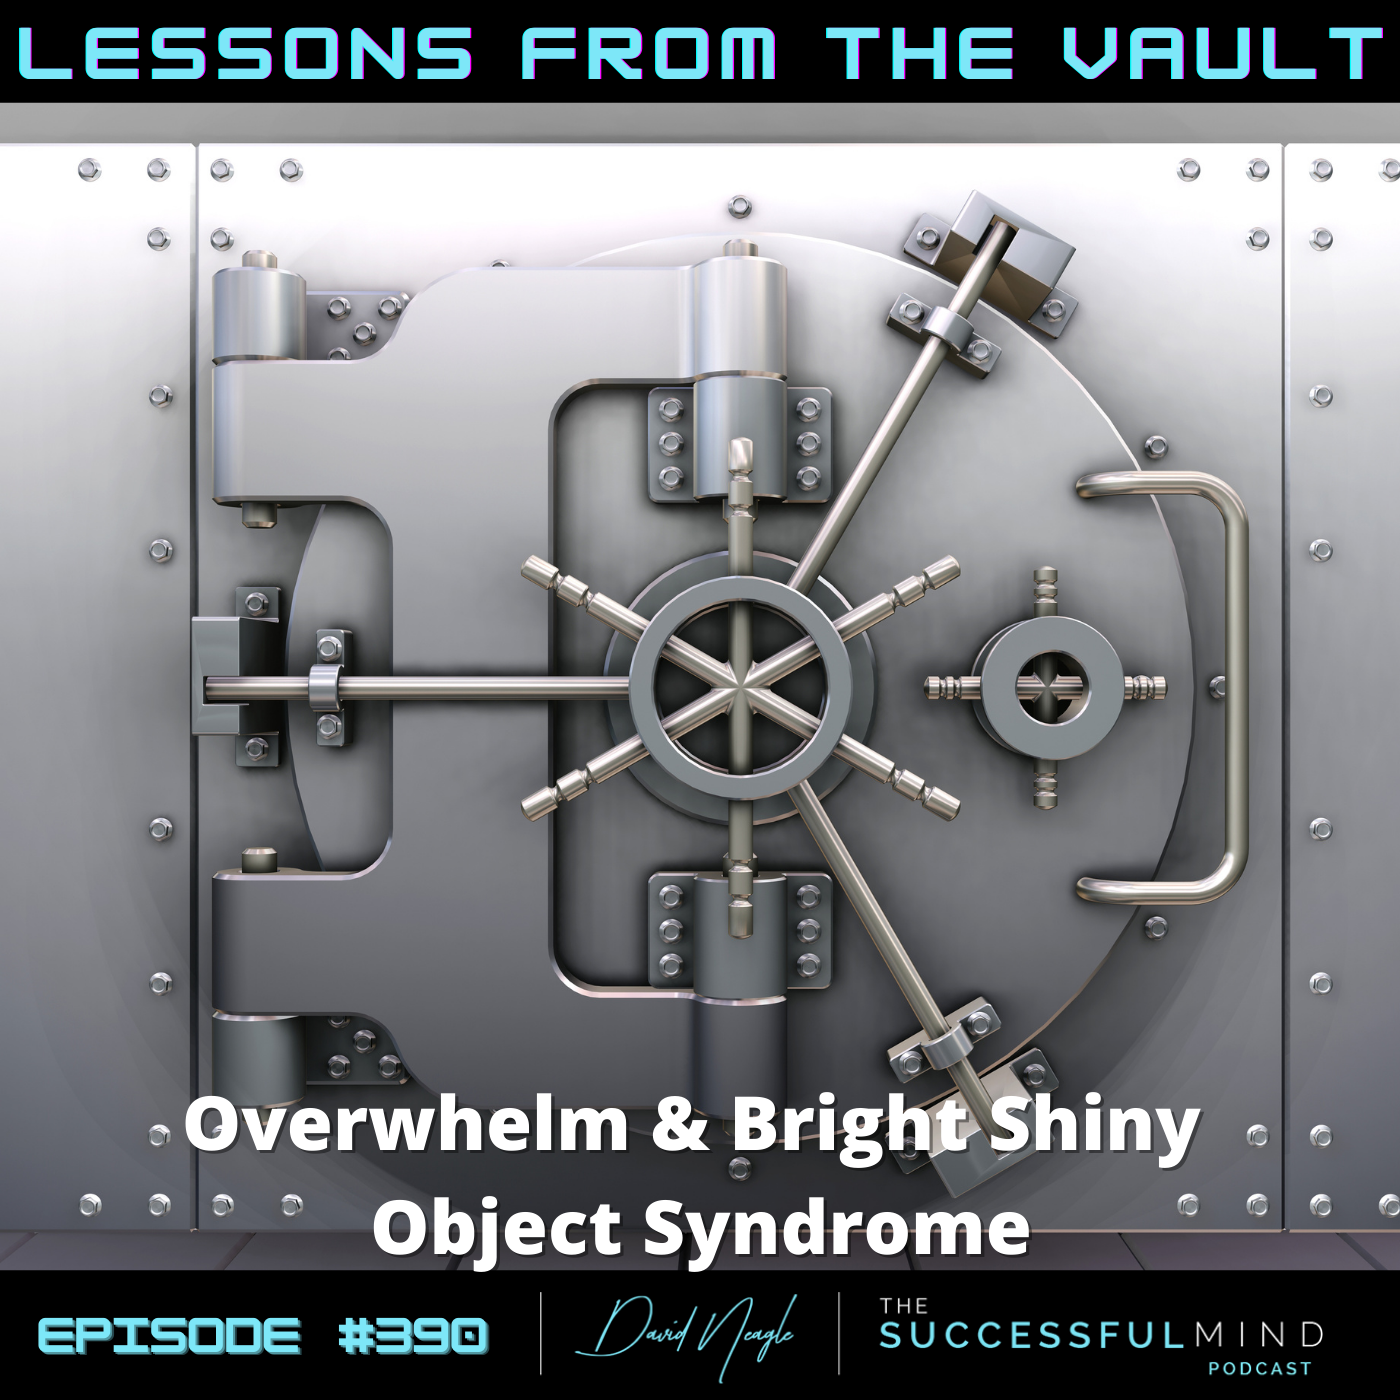 The Successful Mind Podcast – Episode 390 – Lessons From The Vault: Overwhelm & Bright Shiny Object Syndrome